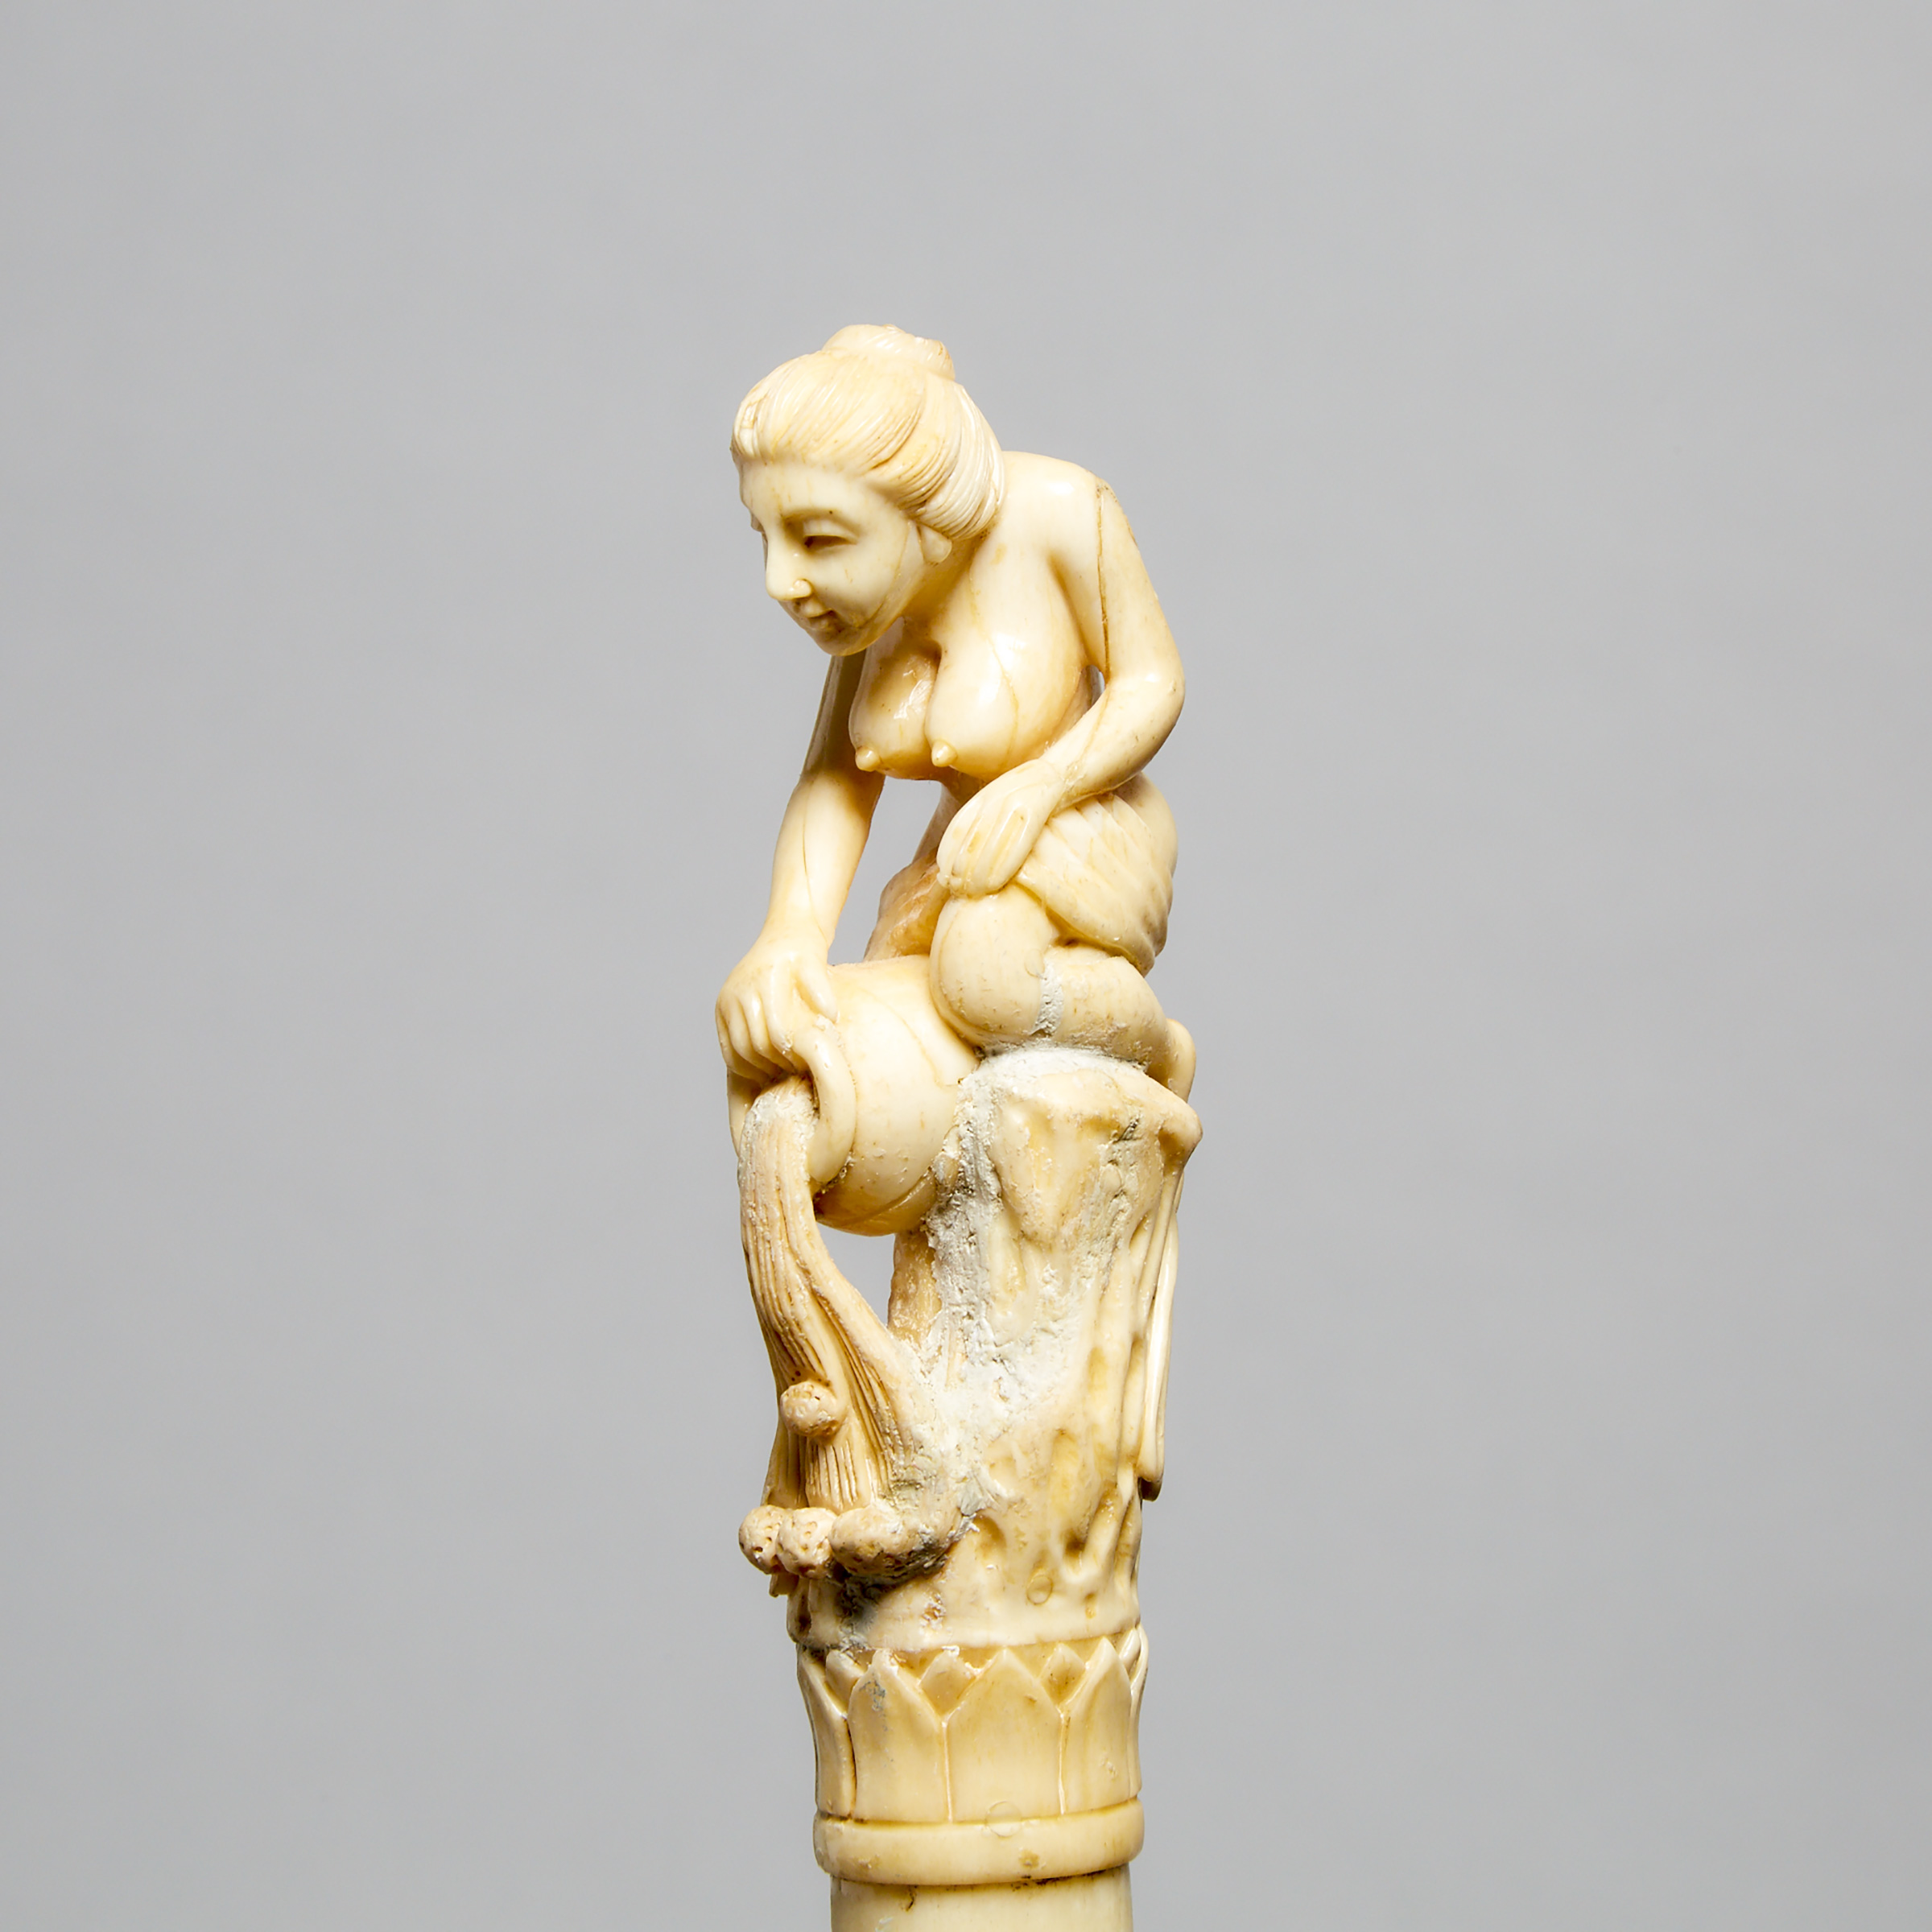 Carved Bone Cane with Water Bearer Nude Figural Handle, 19th/early 20th century